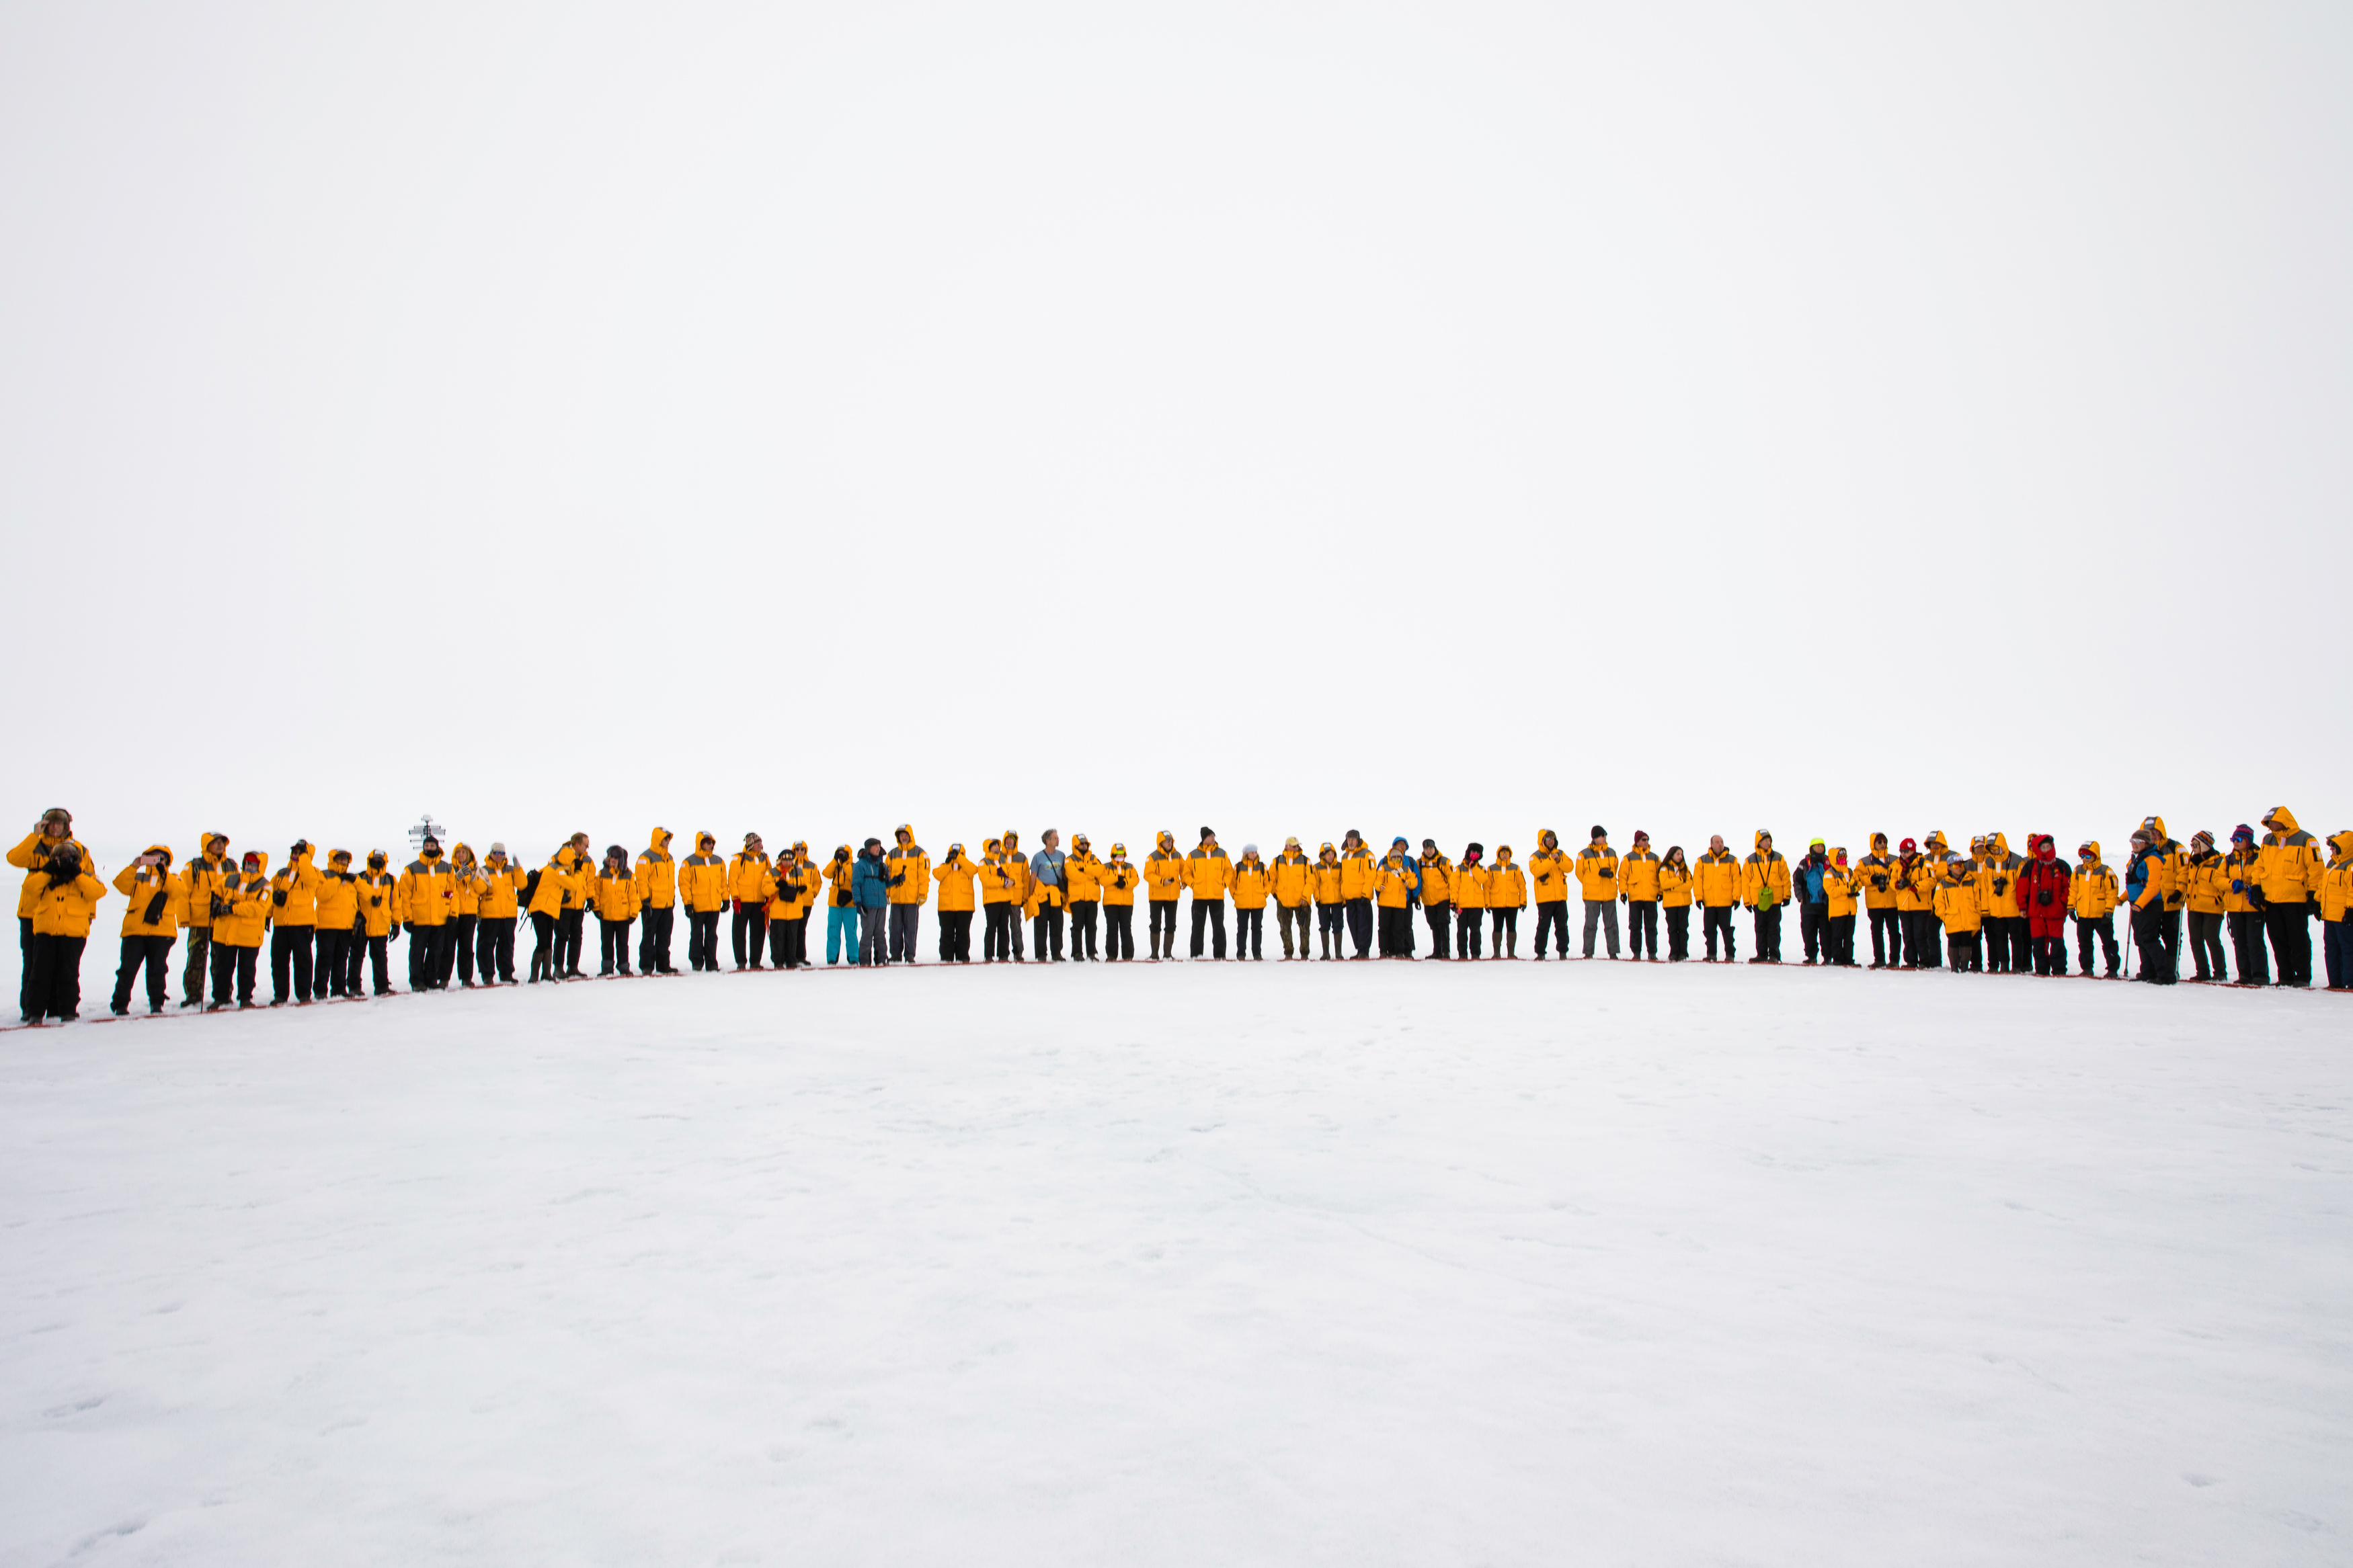 North Pole passengers standing together for the Circle Ceremony near the North Pole. Photo: Dani Plumb